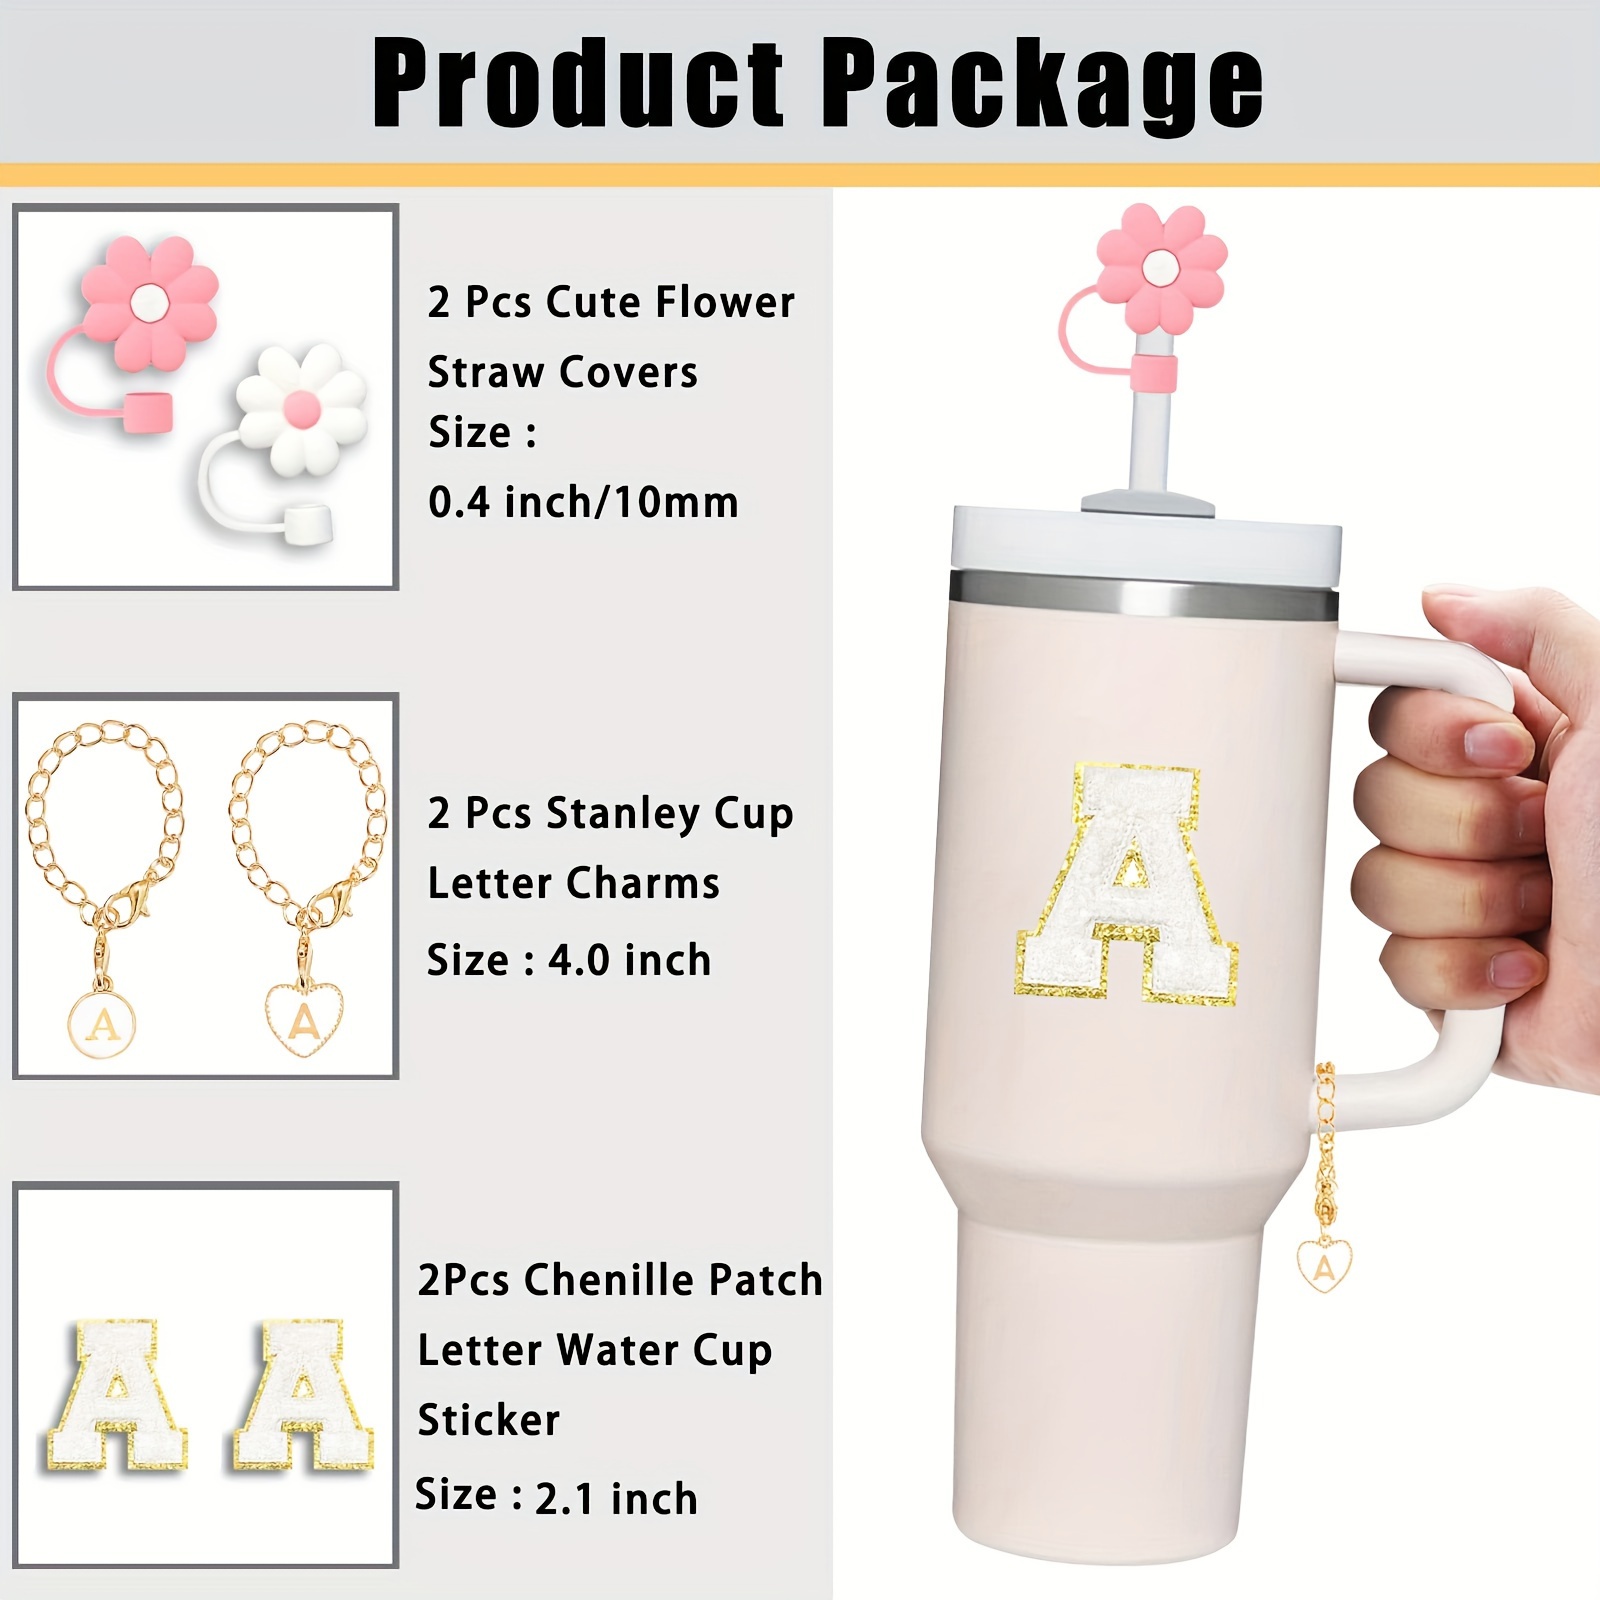 2Pcs Letter Charms Accessories for Stanley Cup Tumbler Water Cup